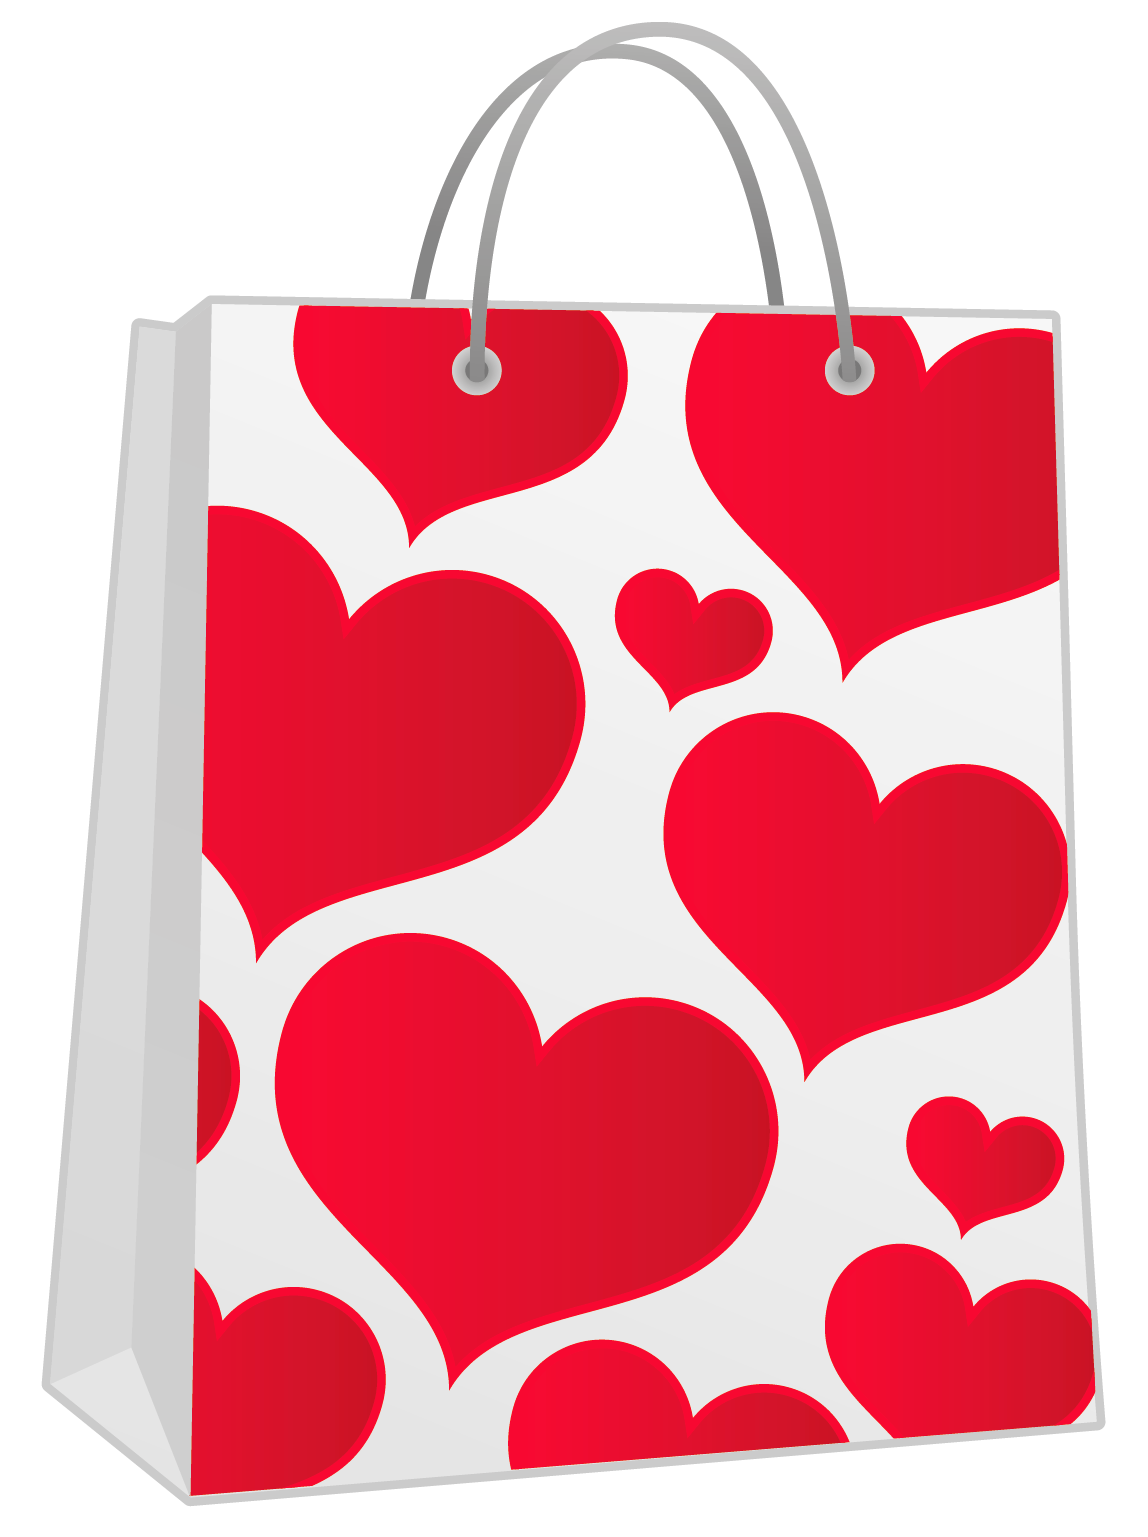 Shopping Bags Free To Use Clipart - Shopping Bag Clip Art - Free Transparent  PNG Clipart Images Download